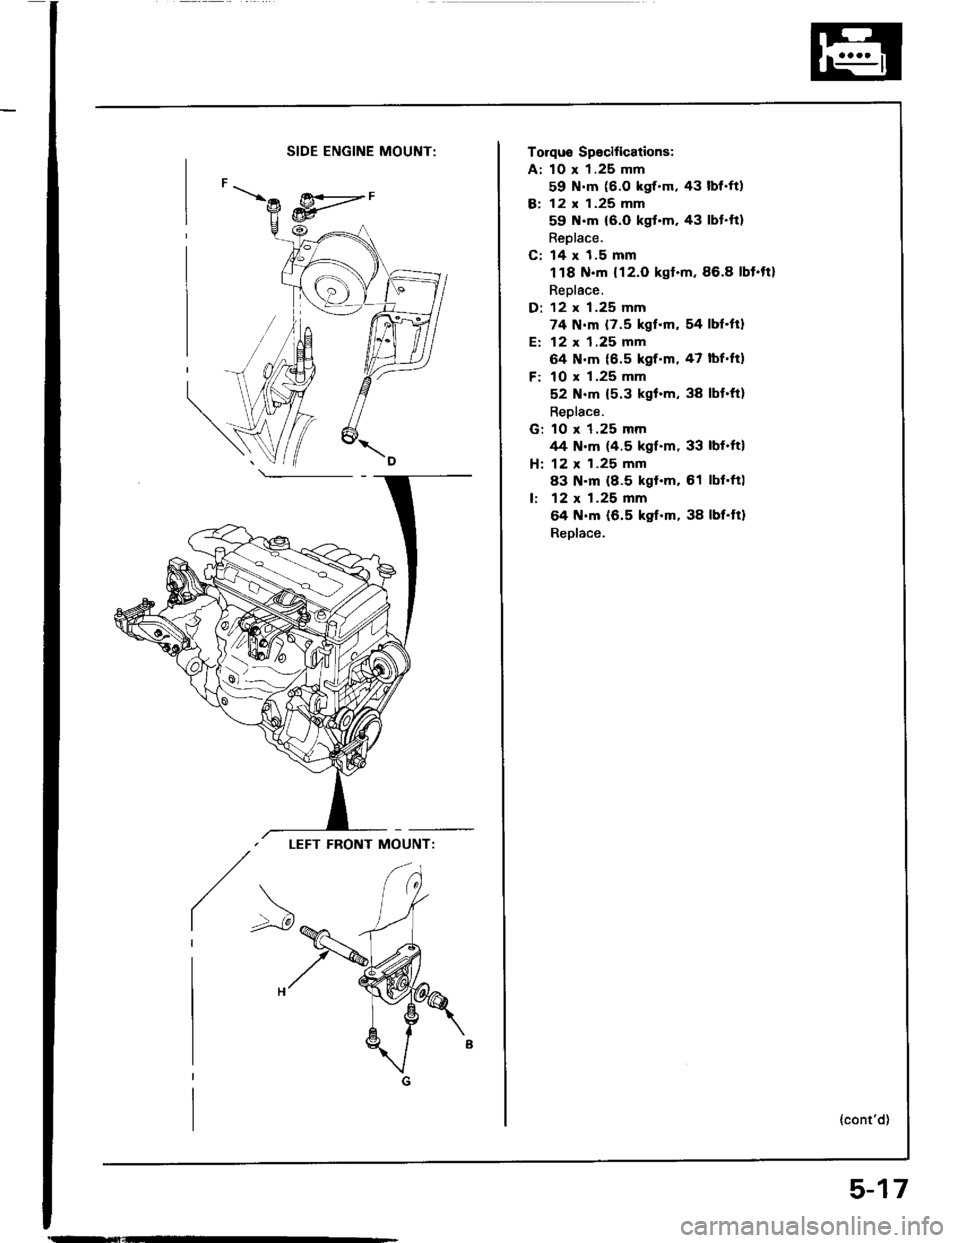 ACURA INTEGRA 1994  Service Repair Manual SIDE ENGINE MOUNT:
LEFT FRONT MOUNT:
/>
Torqus Spocifications:
A: 10 x 1.25 mm
59 N.m (6.O kgf.m, 43 lbf.ft)
B: 12 x 1.25 mm
59 N.m {6.0 kgt.m. 43 lbt.ft}
Reolace.
C: 14 x 1.5 mm
118 N.m {12.O kgt.m,8